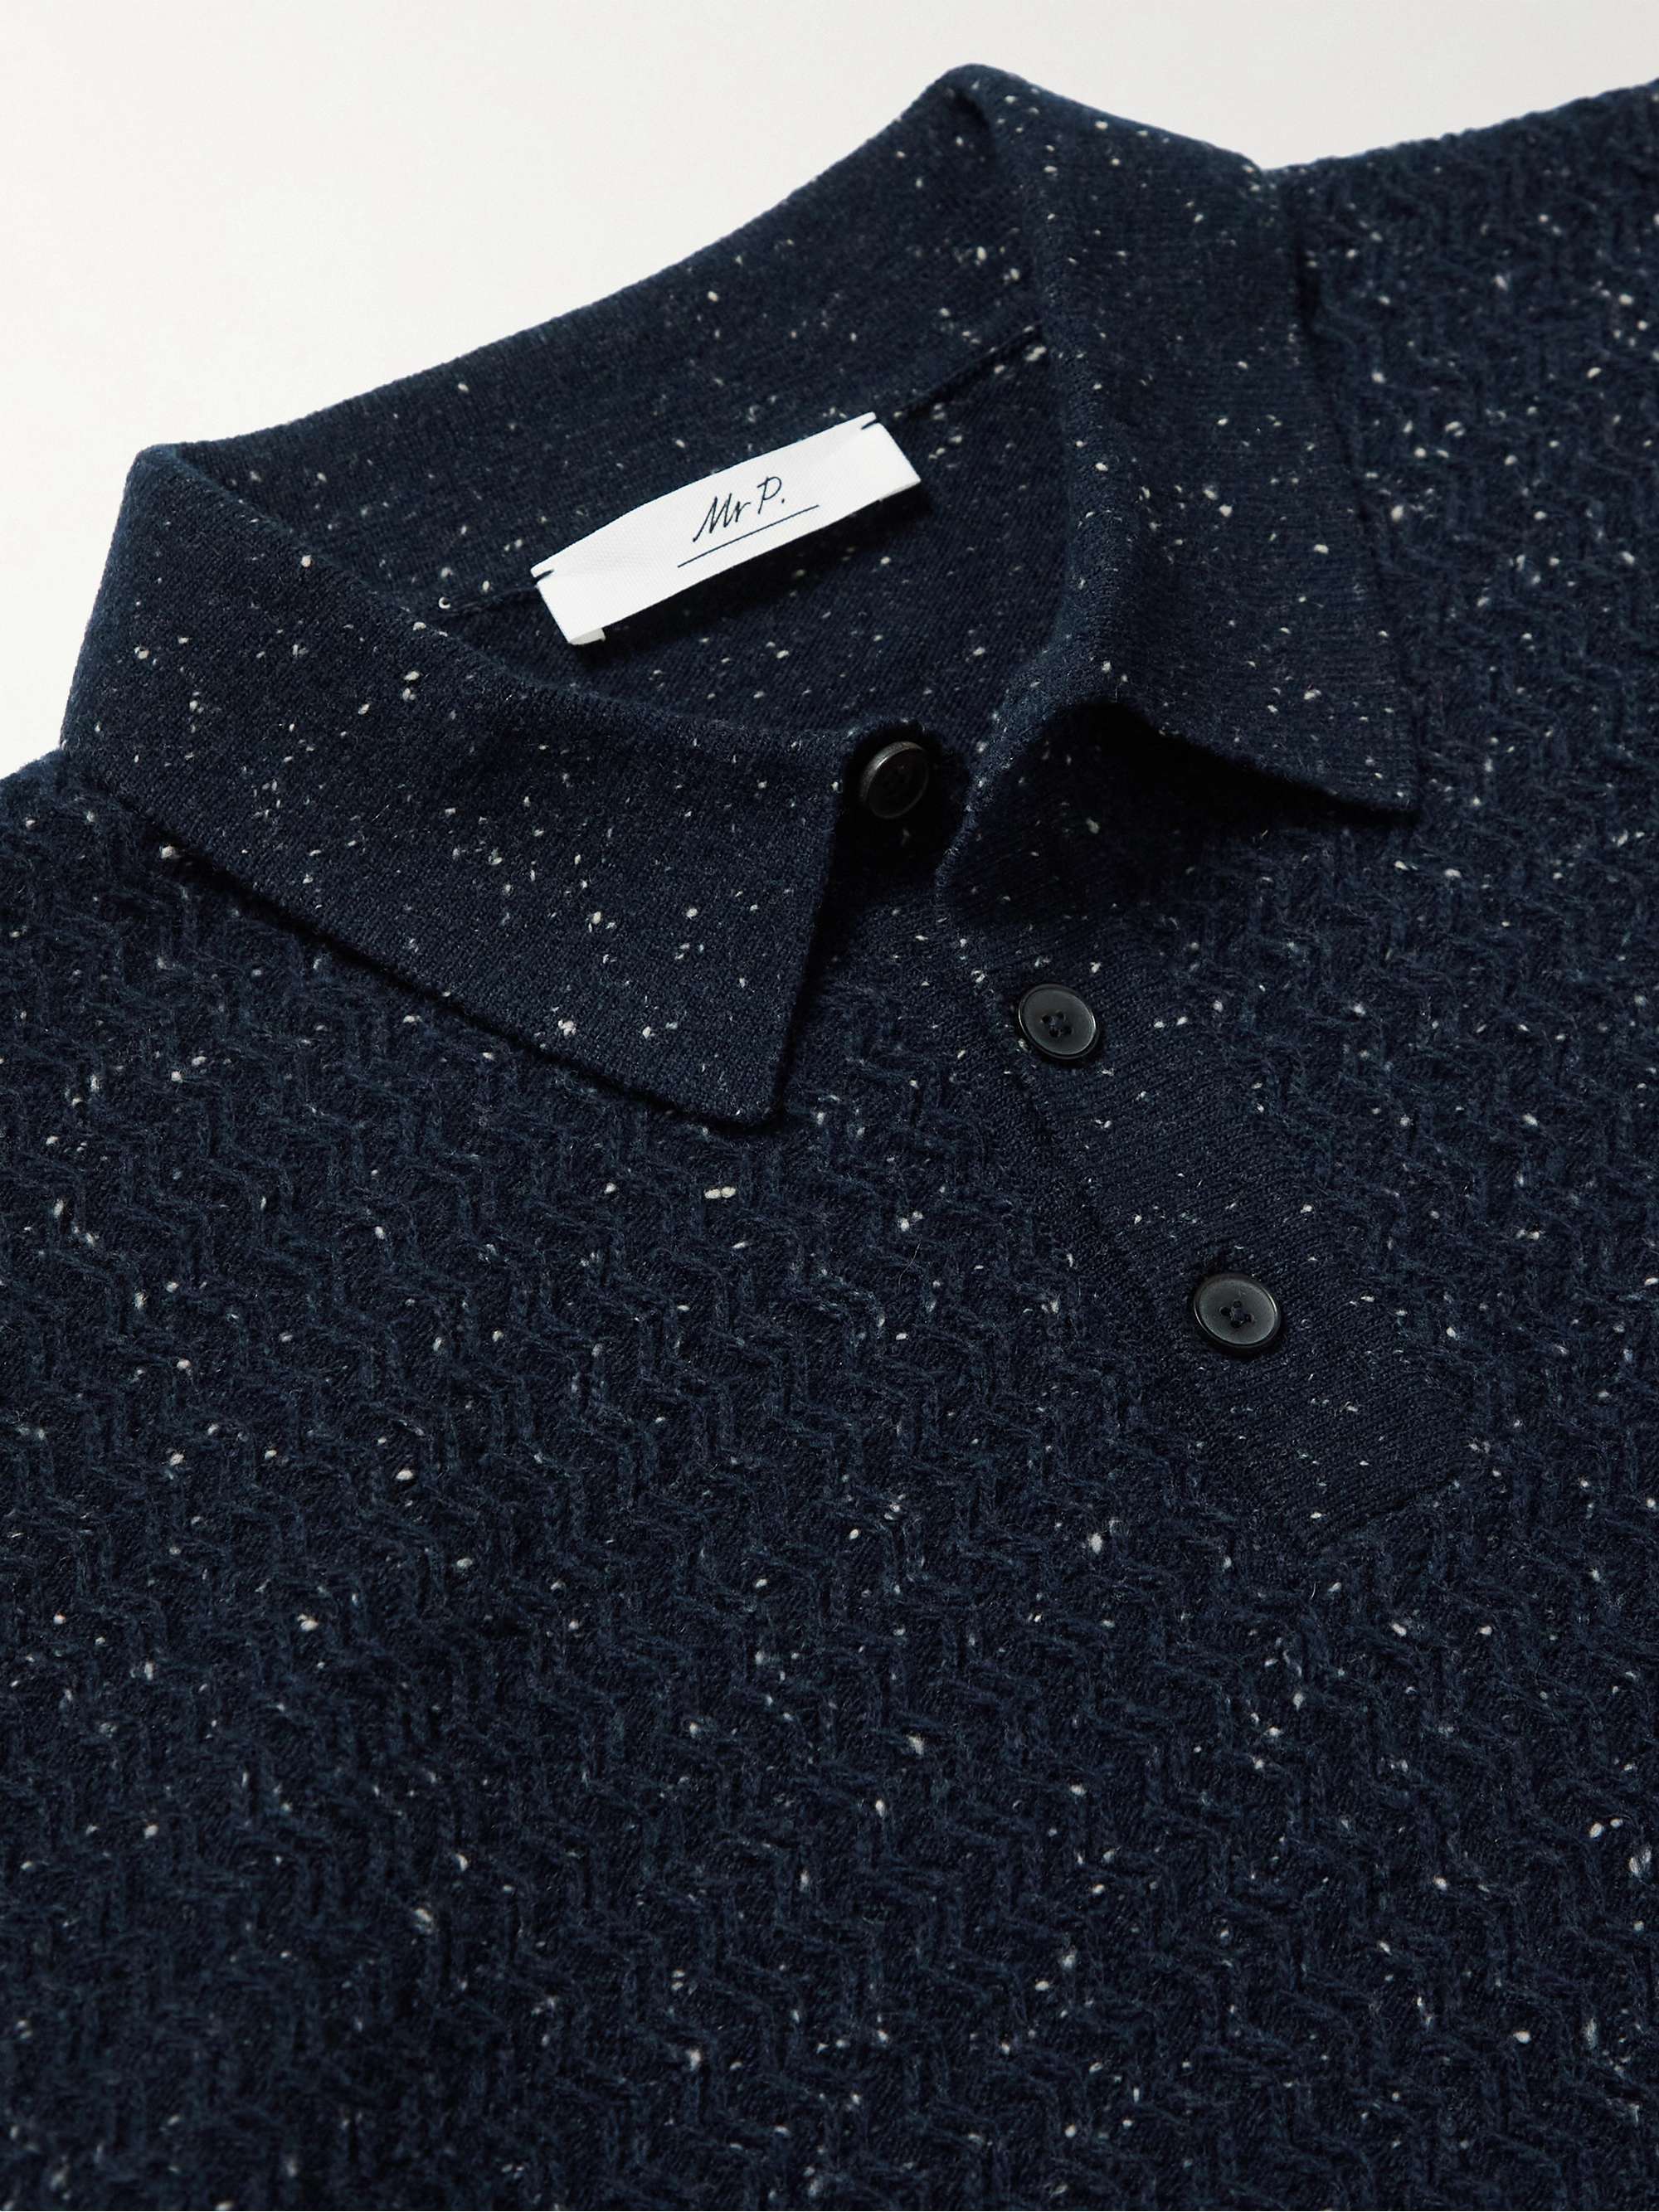 MR P. Racking Stitch Donegal Wool Polo Shirt